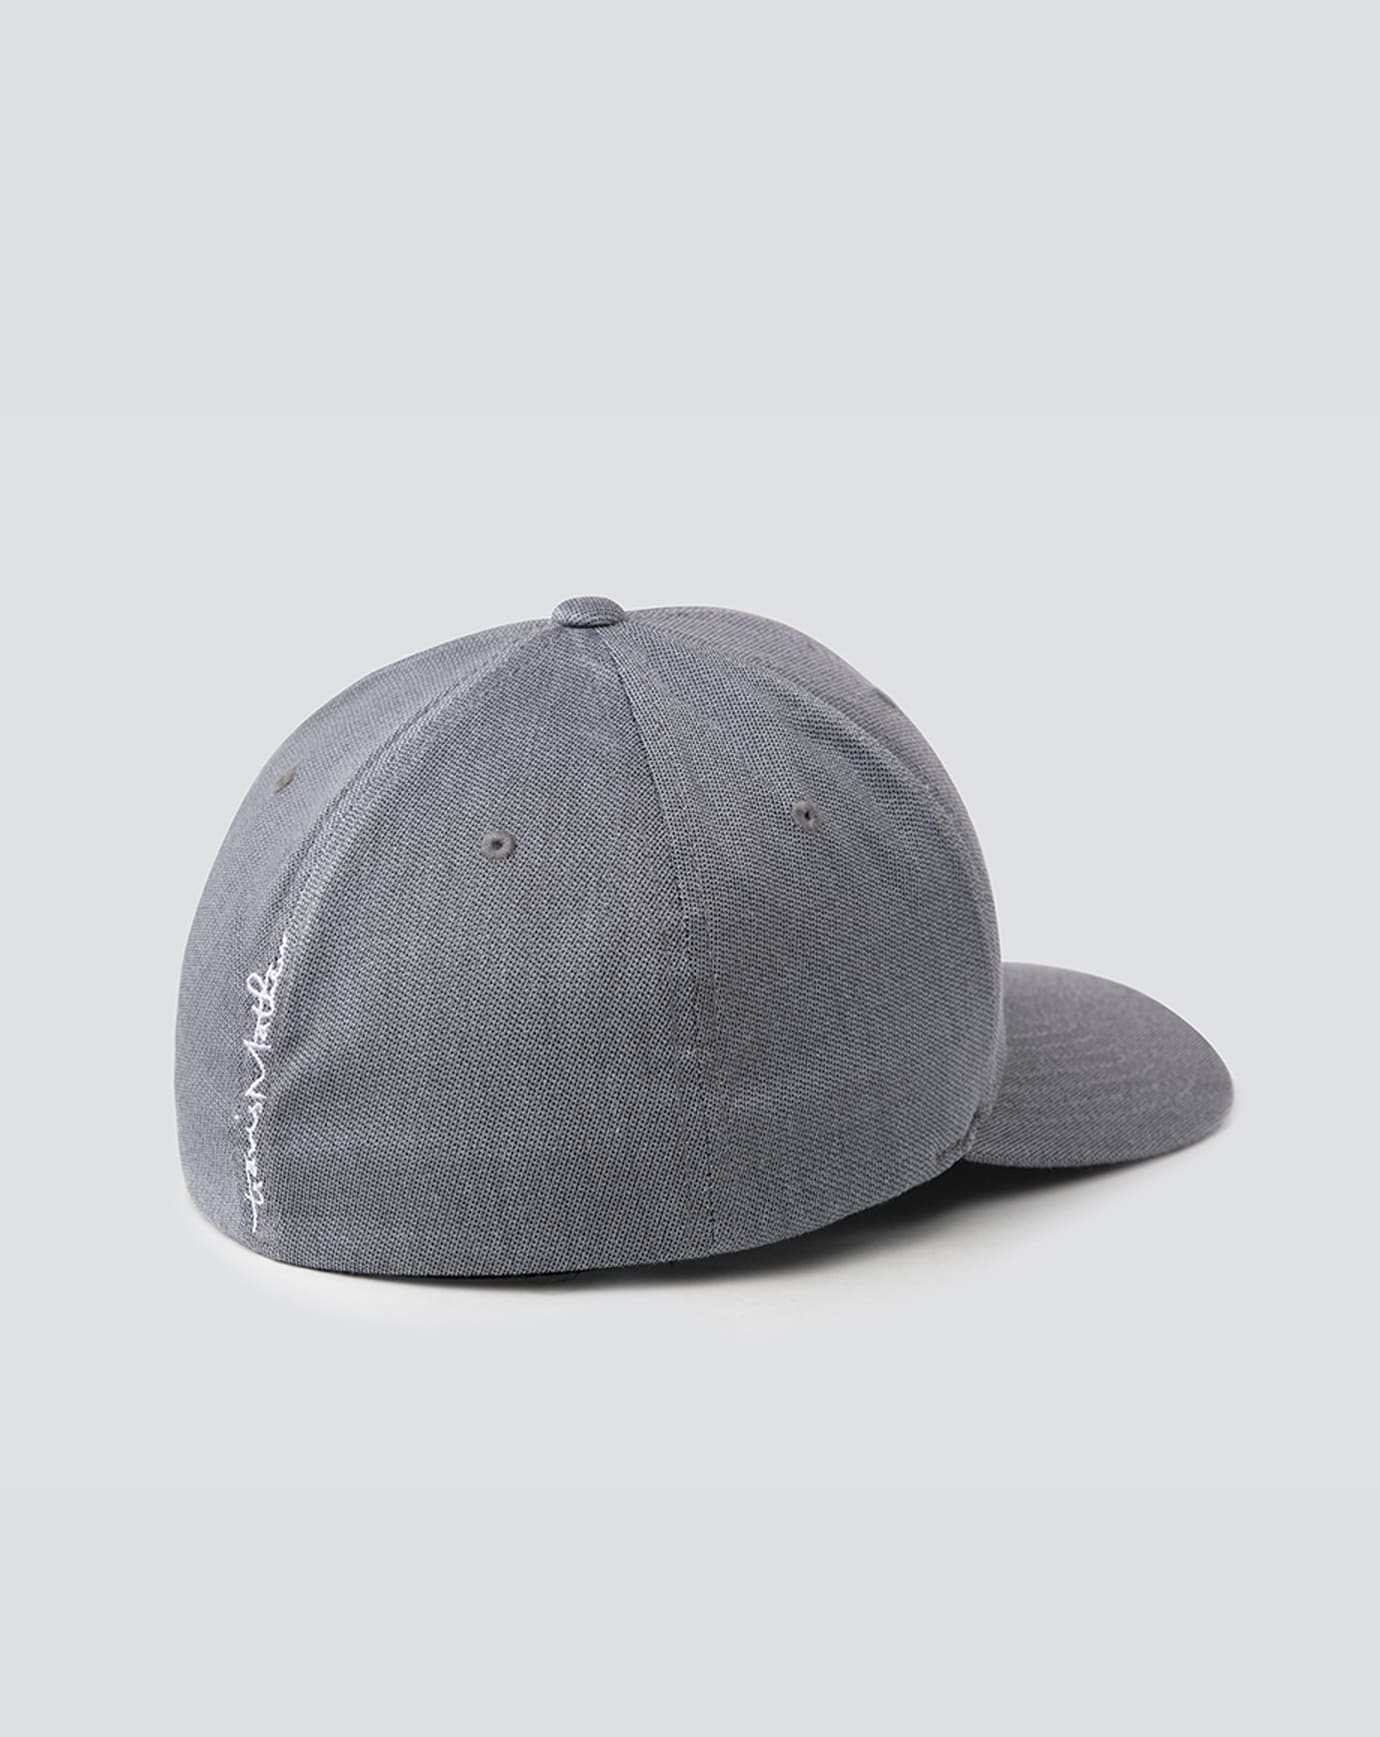 FOUR CORNERS FITTED HAT Image Thumbnail 3